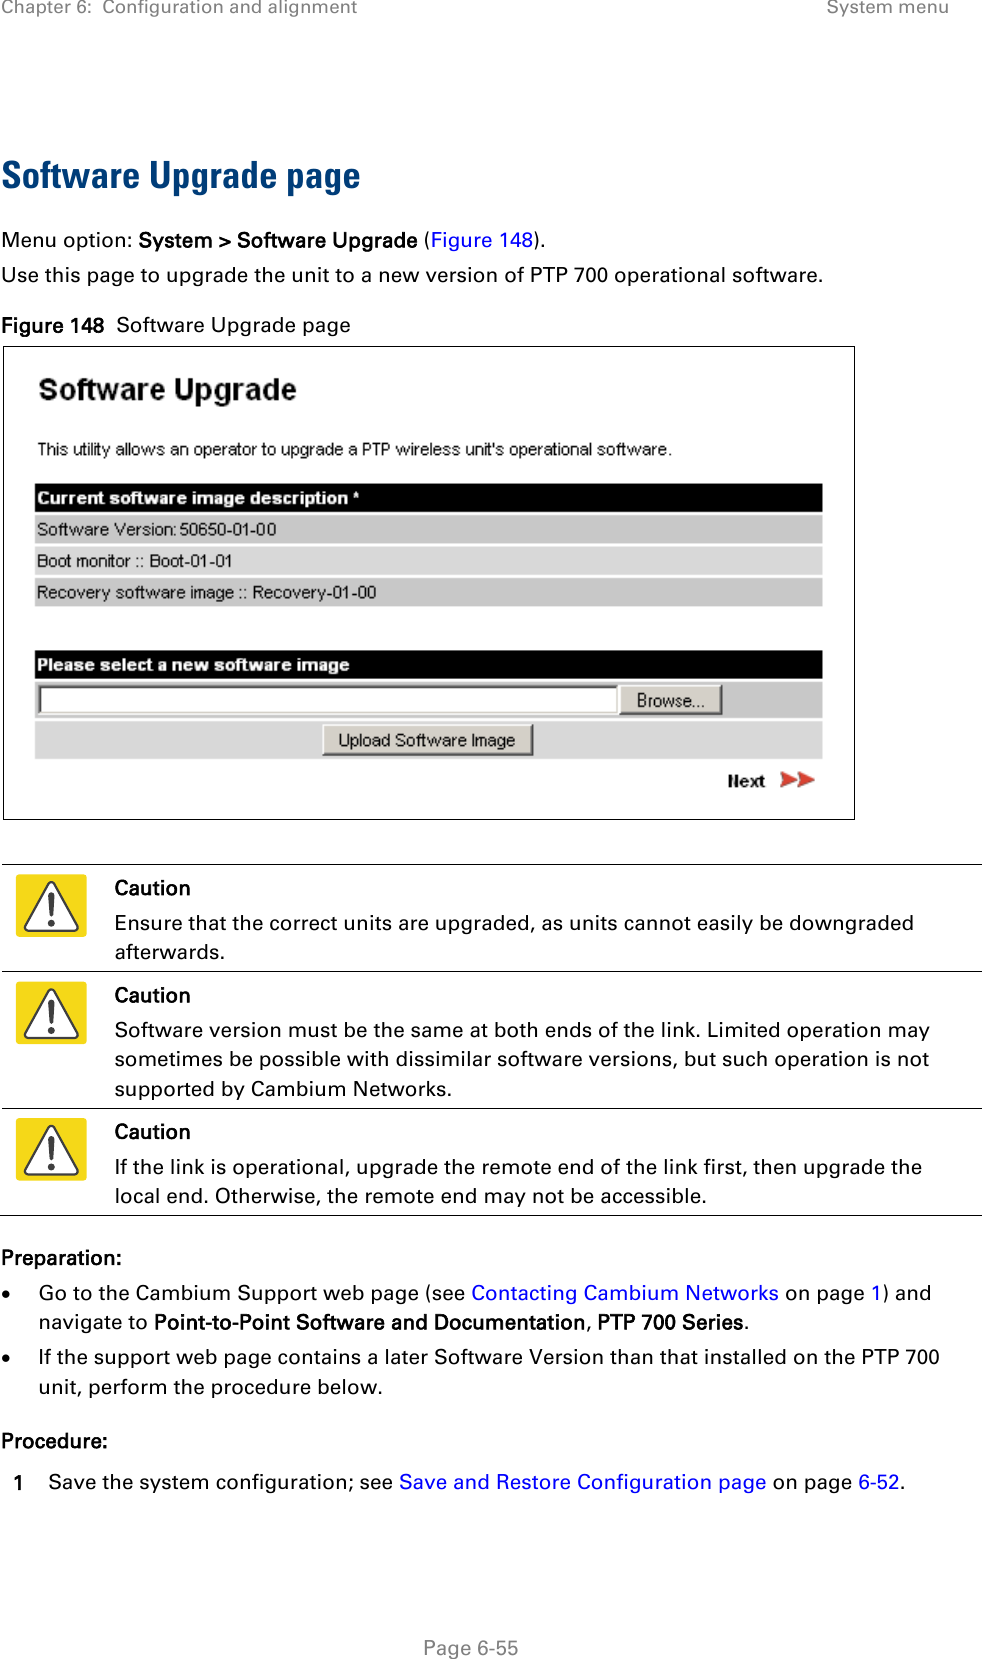 Chapter 6:  Configuration and alignment System menu   Software Upgrade page Menu option: System &gt; Software Upgrade (Figure 148). Use this page to upgrade the unit to a new version of PTP 700 operational software. Figure 148  Software Upgrade page    Caution Ensure that the correct units are upgraded, as units cannot easily be downgraded afterwards.  Caution Software version must be the same at both ends of the link. Limited operation may sometimes be possible with dissimilar software versions, but such operation is not supported by Cambium Networks.  Caution If the link is operational, upgrade the remote end of the link first, then upgrade the local end. Otherwise, the remote end may not be accessible. Preparation: • Go to the Cambium Support web page (see Contacting Cambium Networks on page 1) and navigate to Point-to-Point Software and Documentation, PTP 700 Series. • If the support web page contains a later Software Version than that installed on the PTP 700 unit, perform the procedure below. Procedure: 1 Save the system configuration; see Save and Restore Configuration page on page 6-52.  Page 6-55 